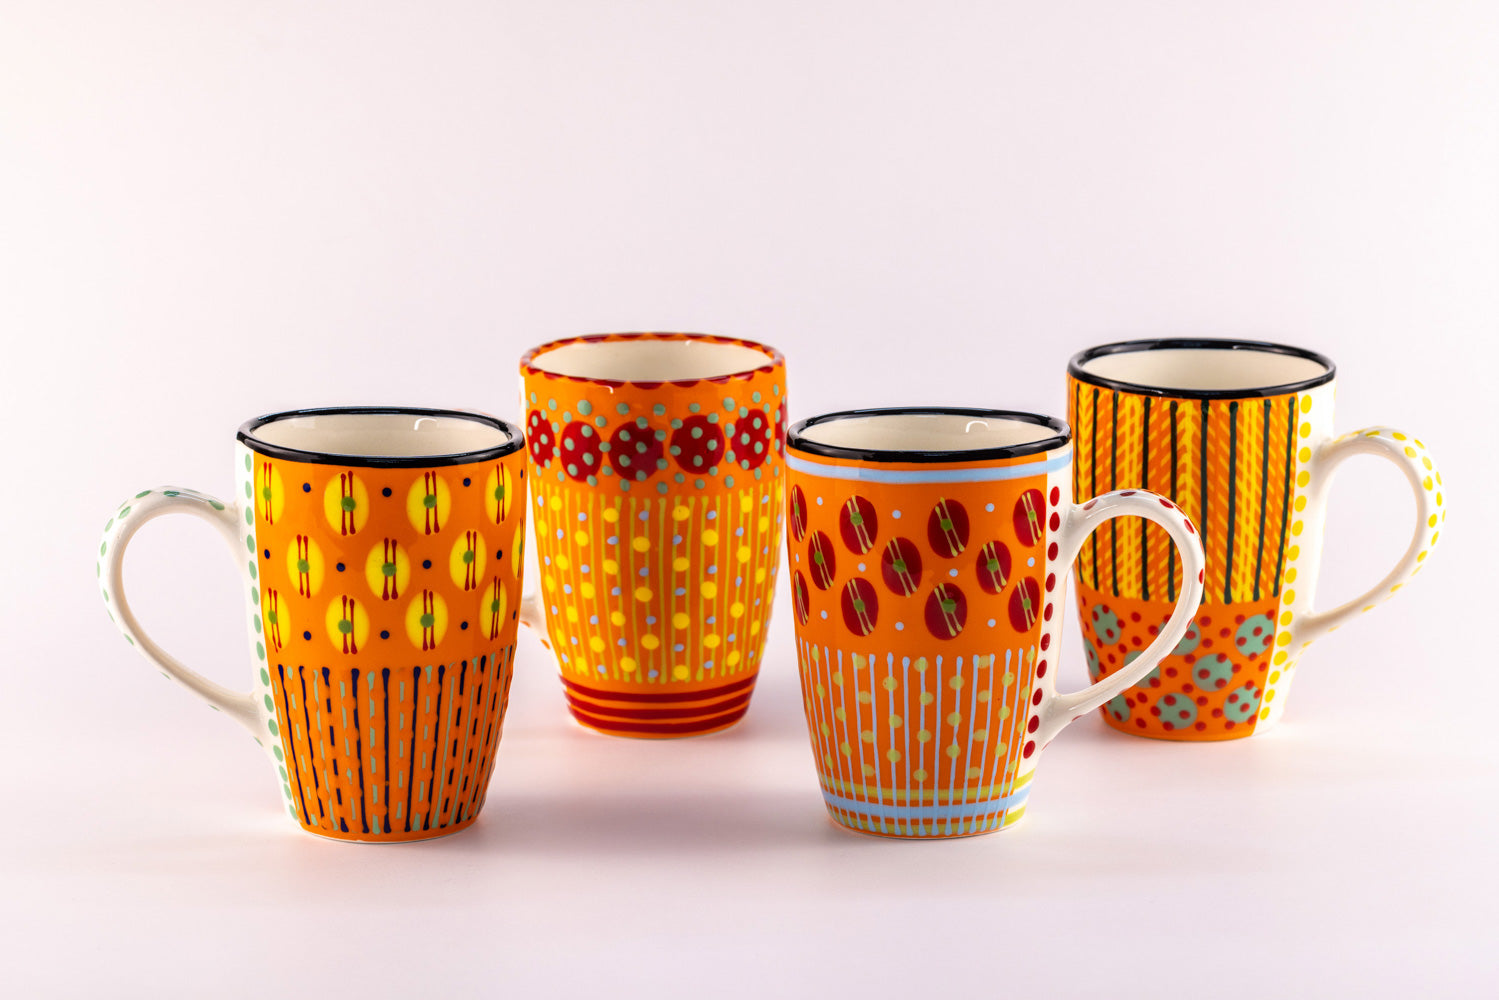 4 Very colorful coffee mugs with Orange base color. Topped with dots & stripes in green, light blue, yellow, and red. Bright & fun!